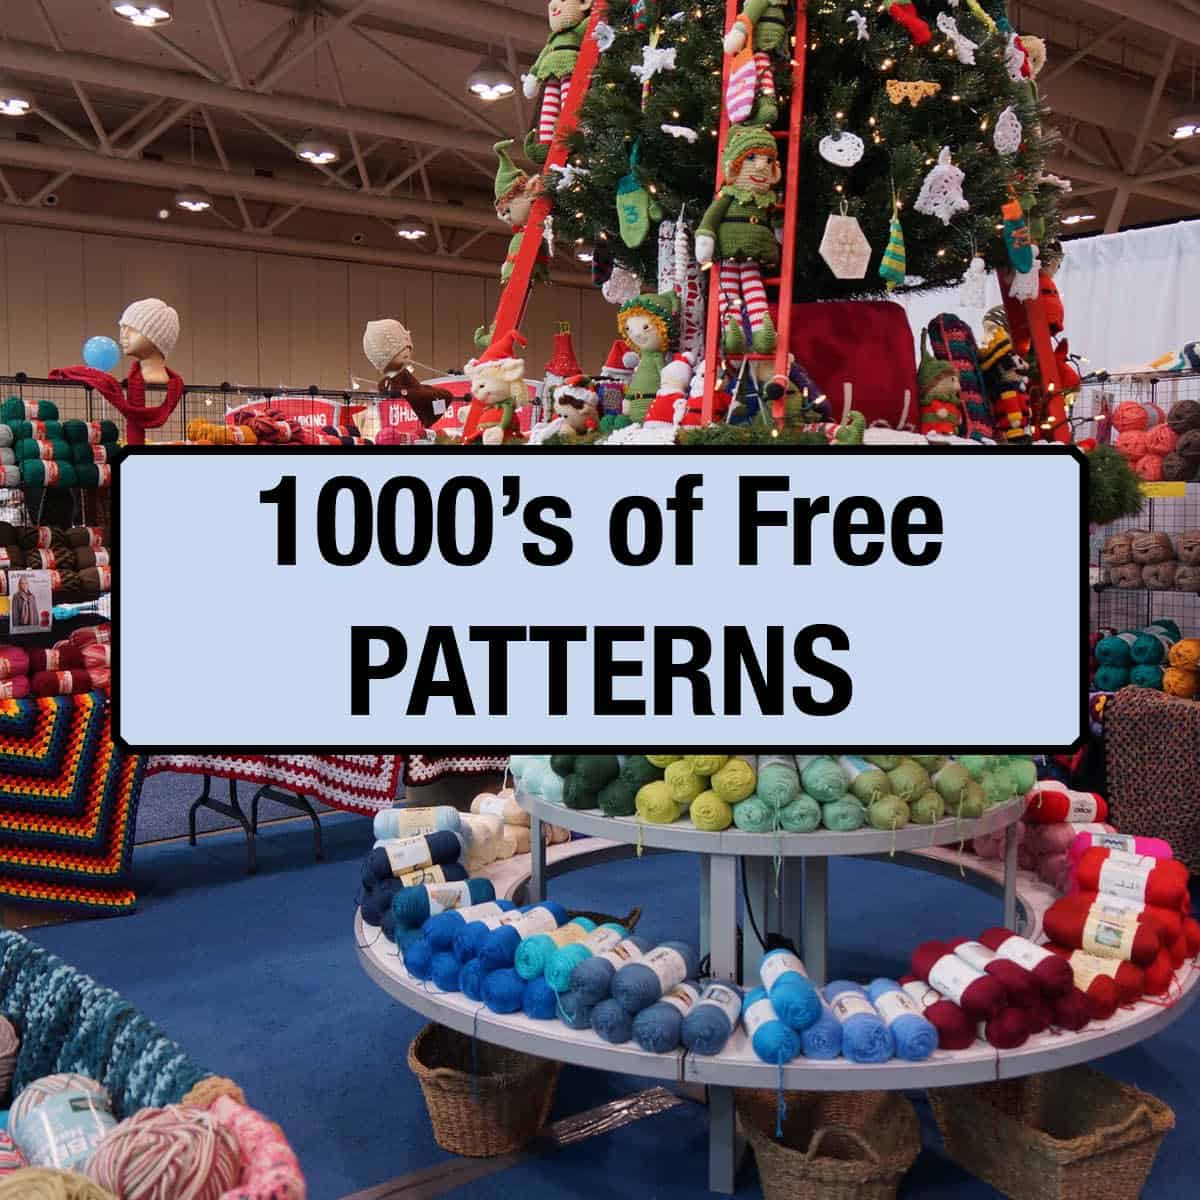 1000's of Free Patterns Collections Ideas